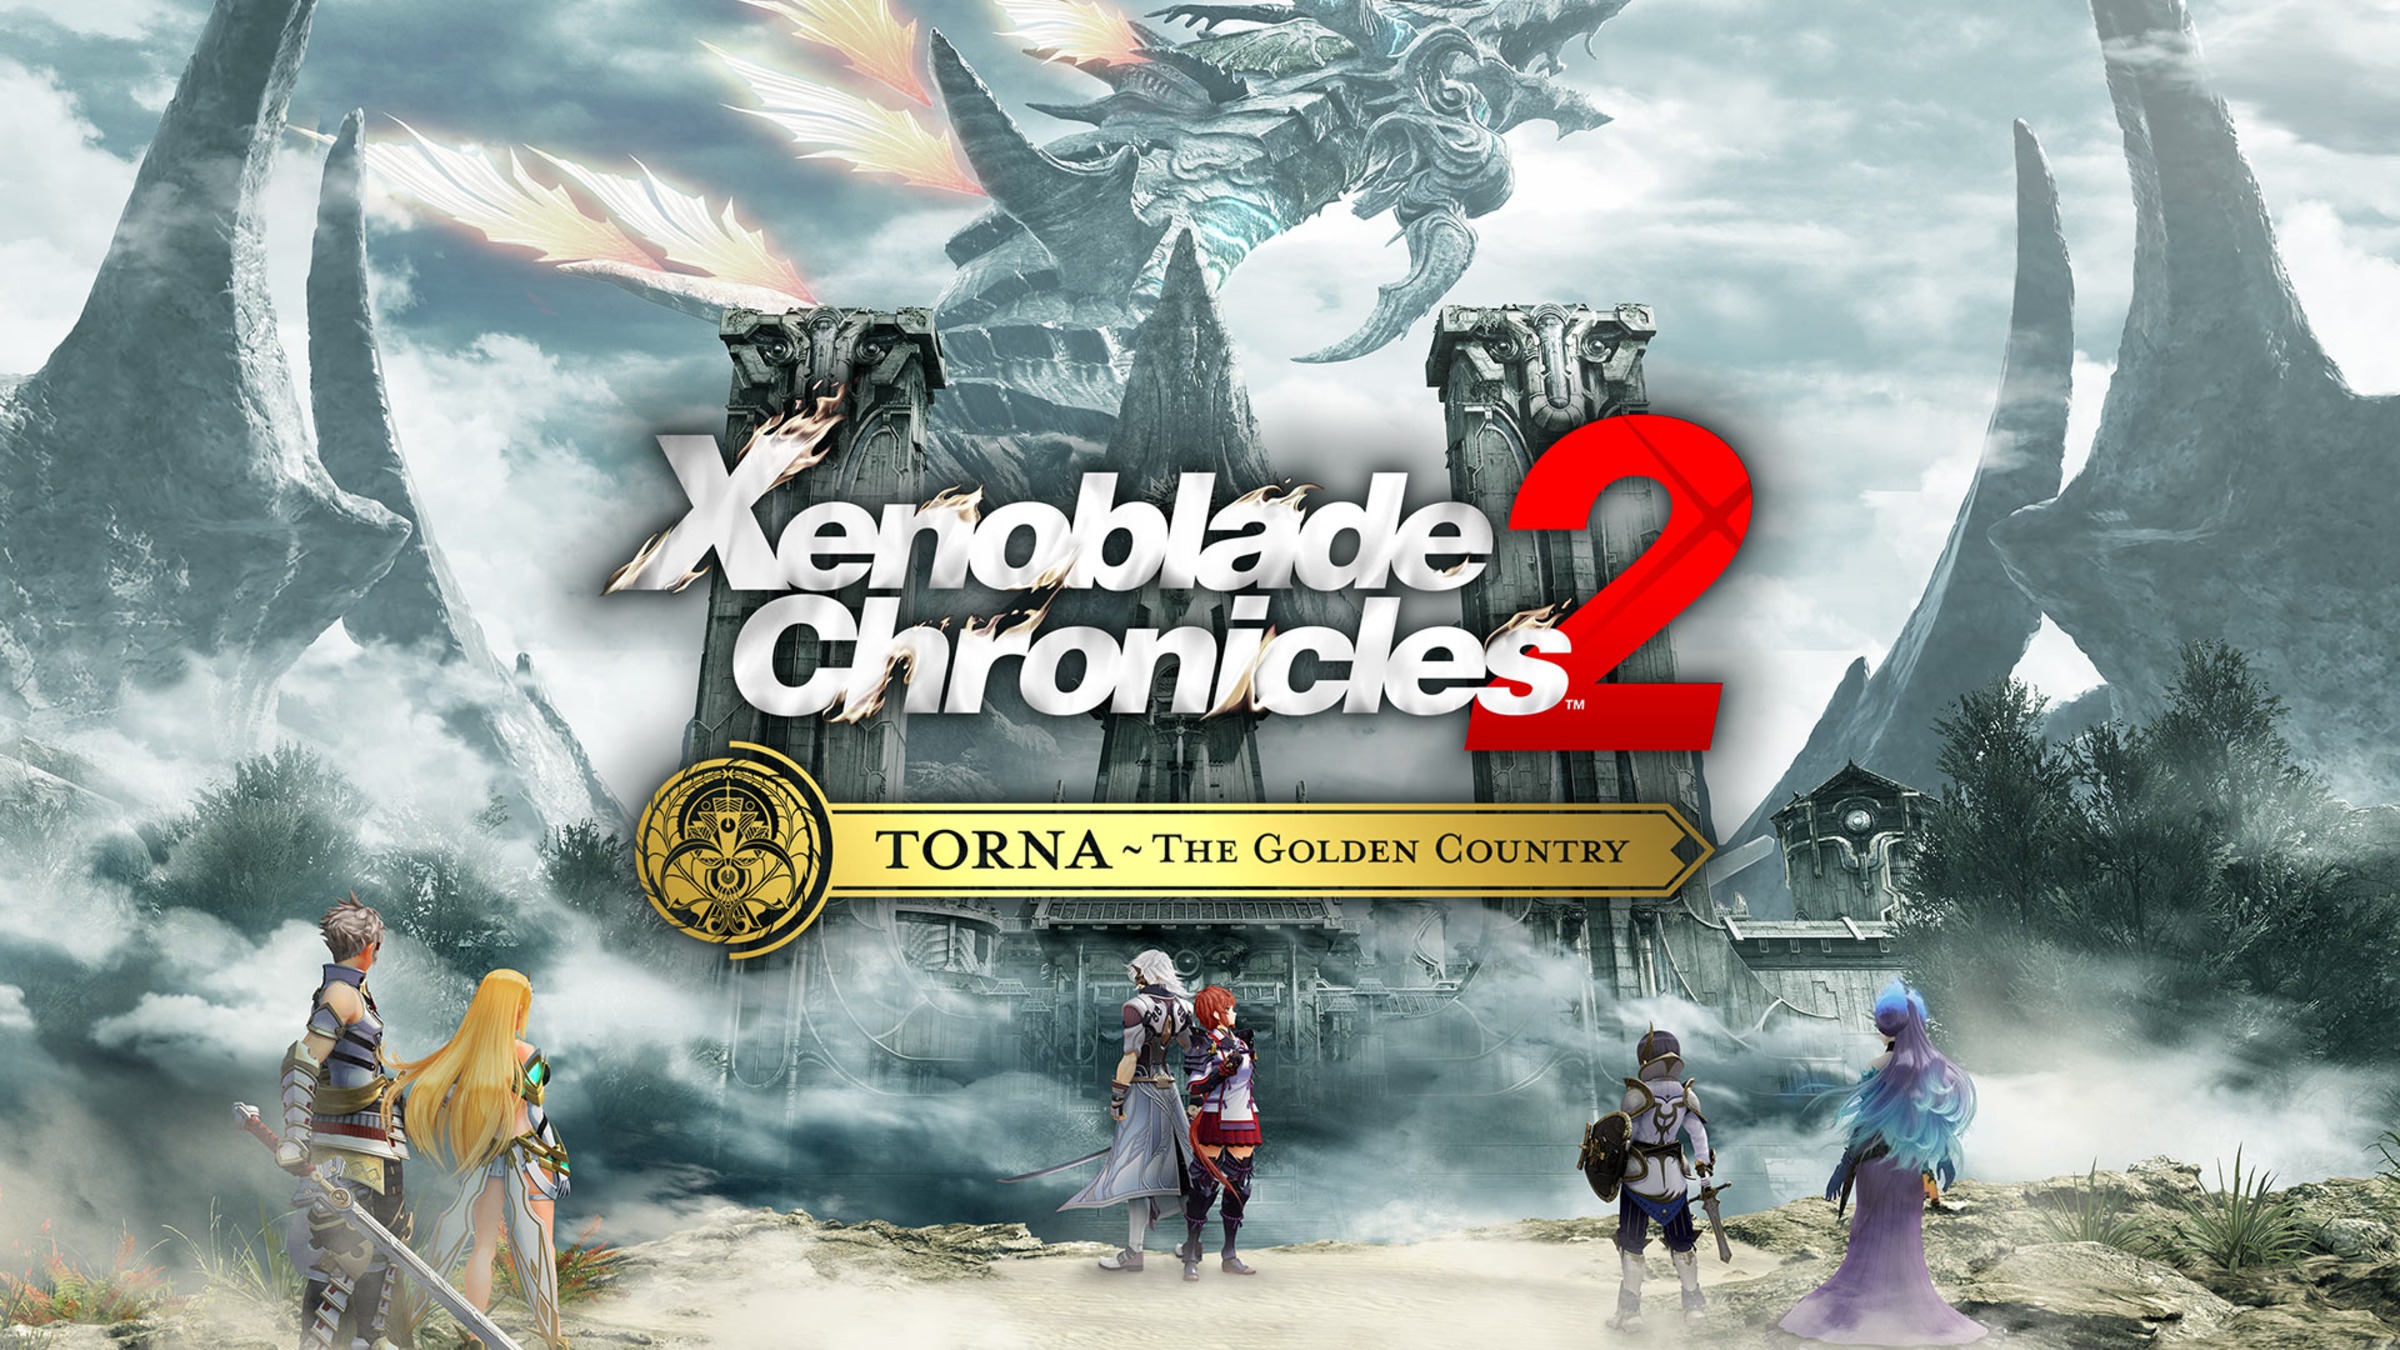 How long is Xenoblade Chronicles 2: Torna ~ The Golden Country?